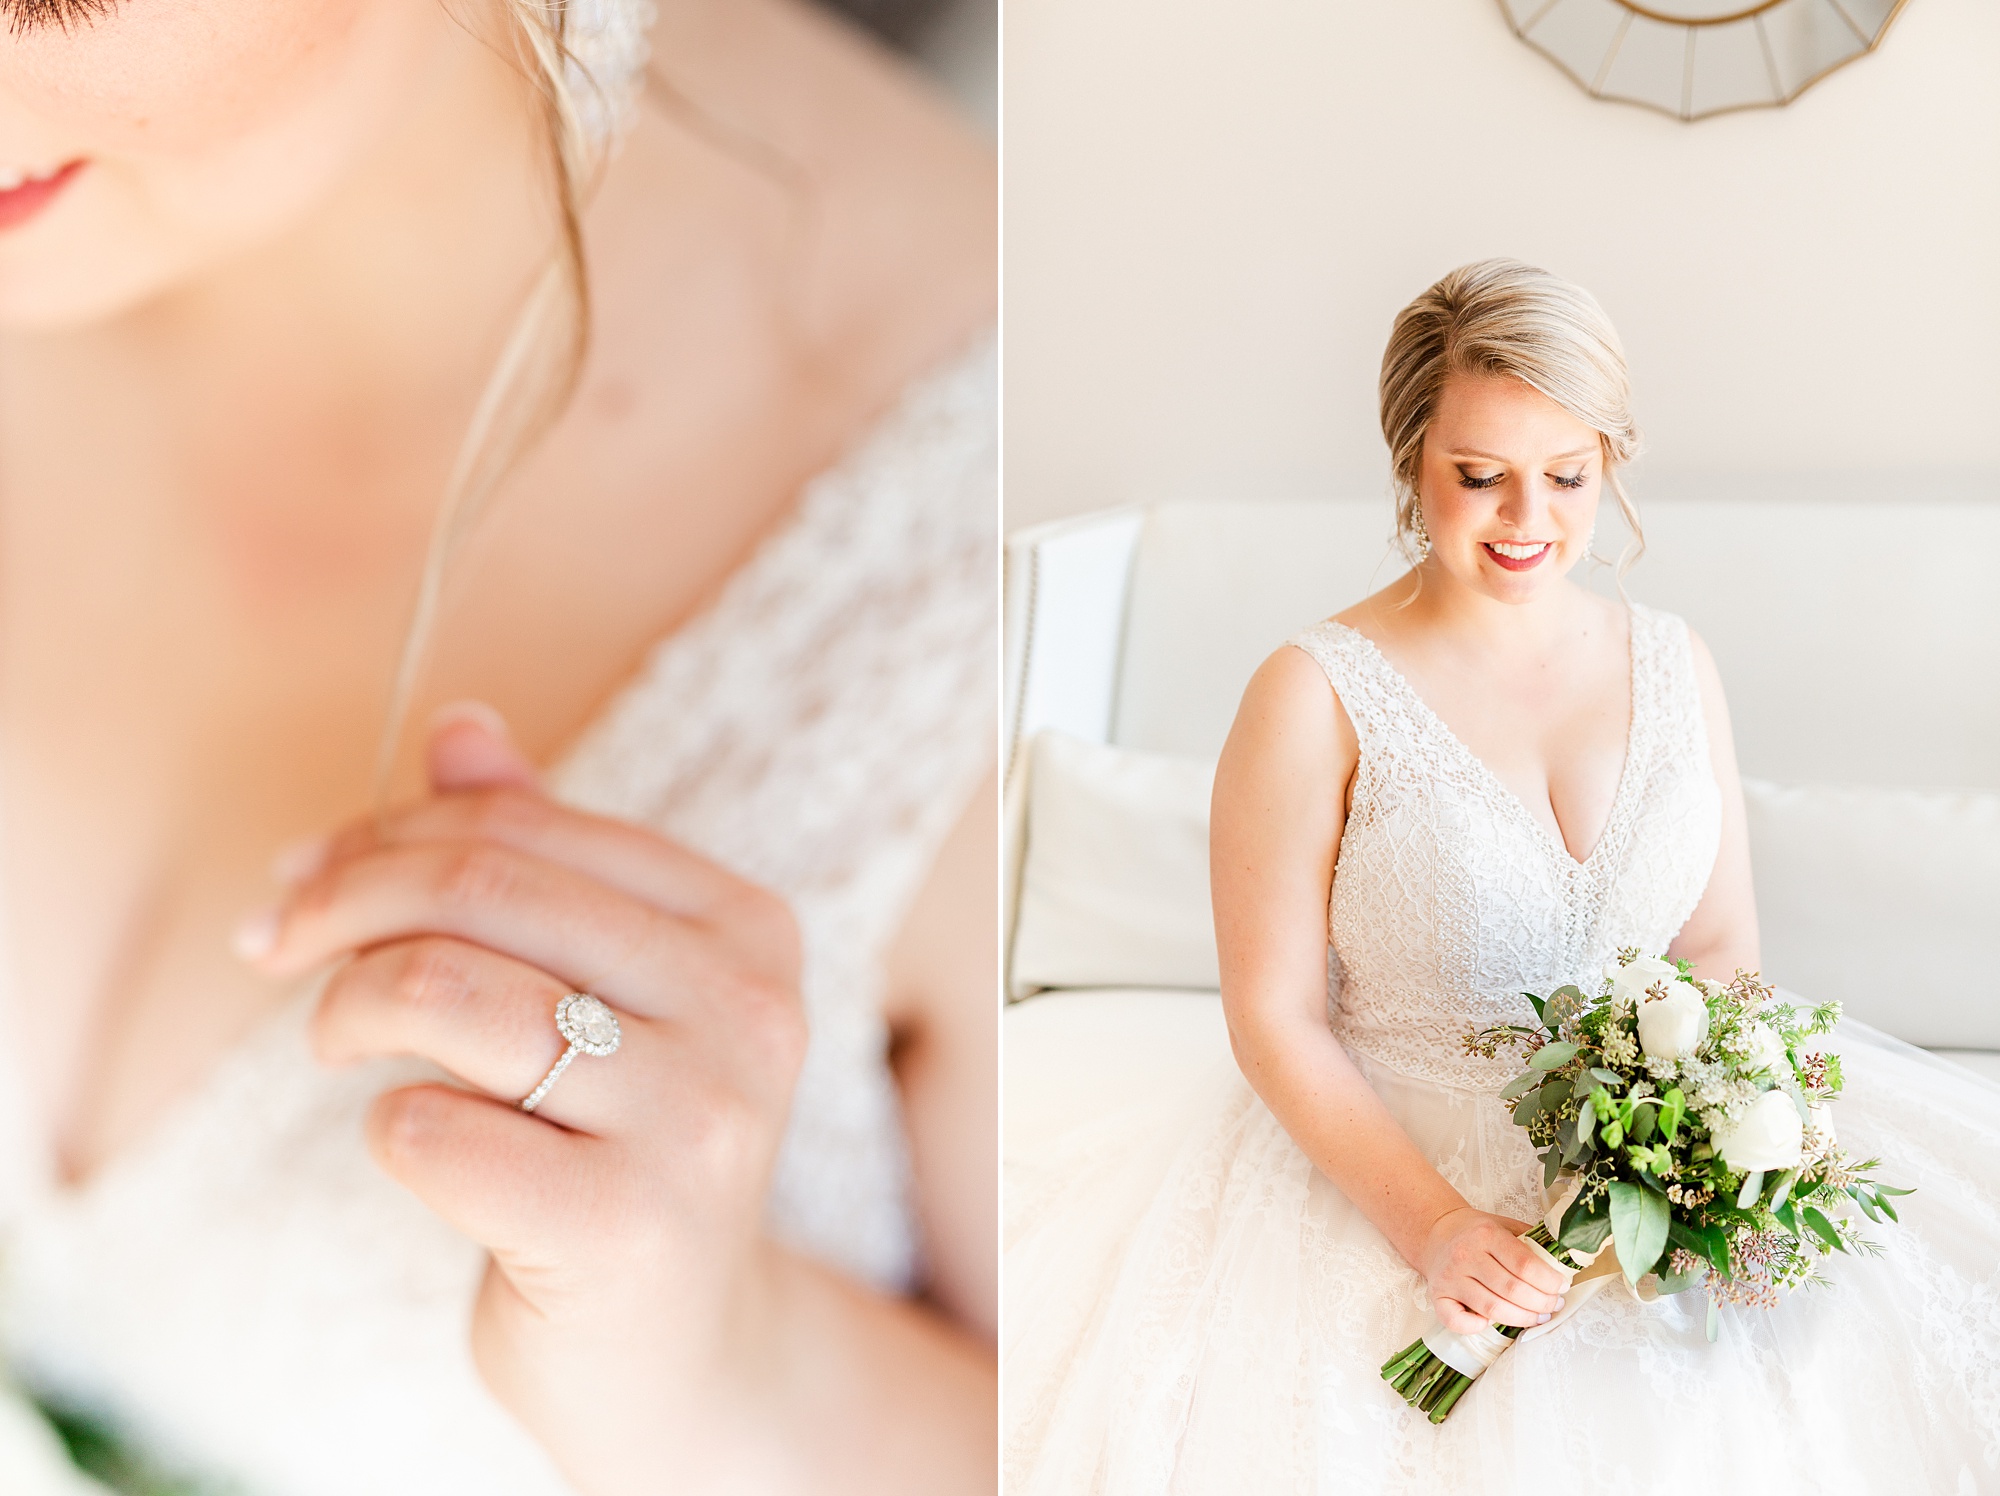 The Glass Box bridal portraits in Raleigh NC